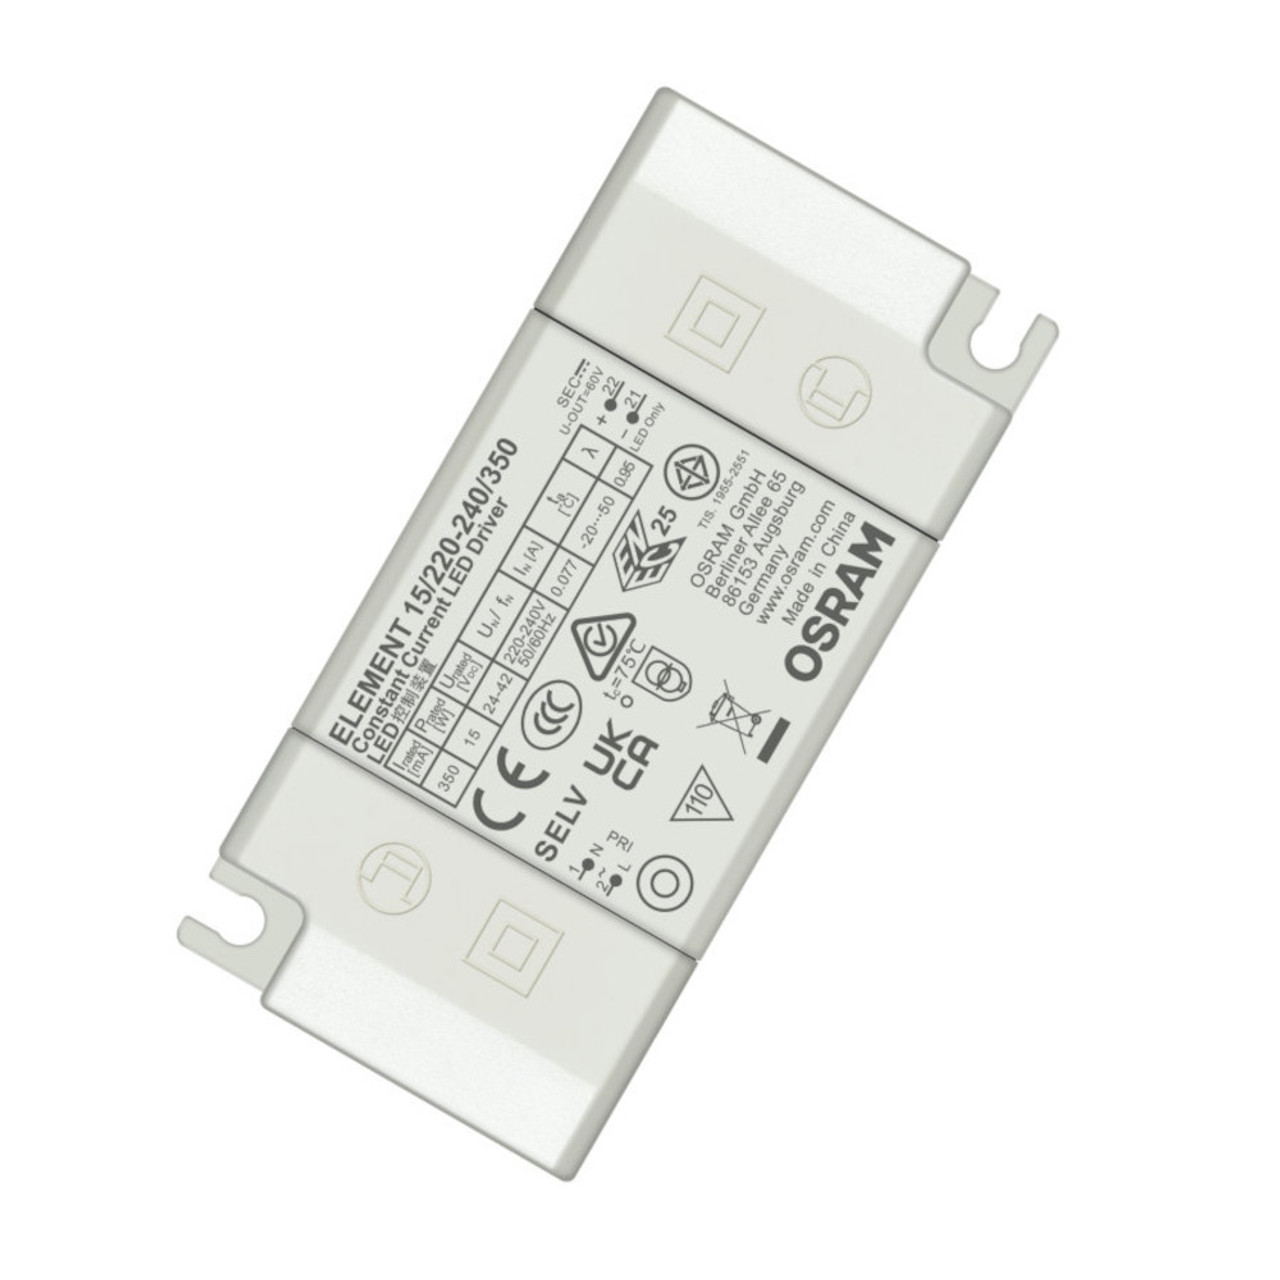 Osram Element G4 15W 350mA Constant Current LED Driver